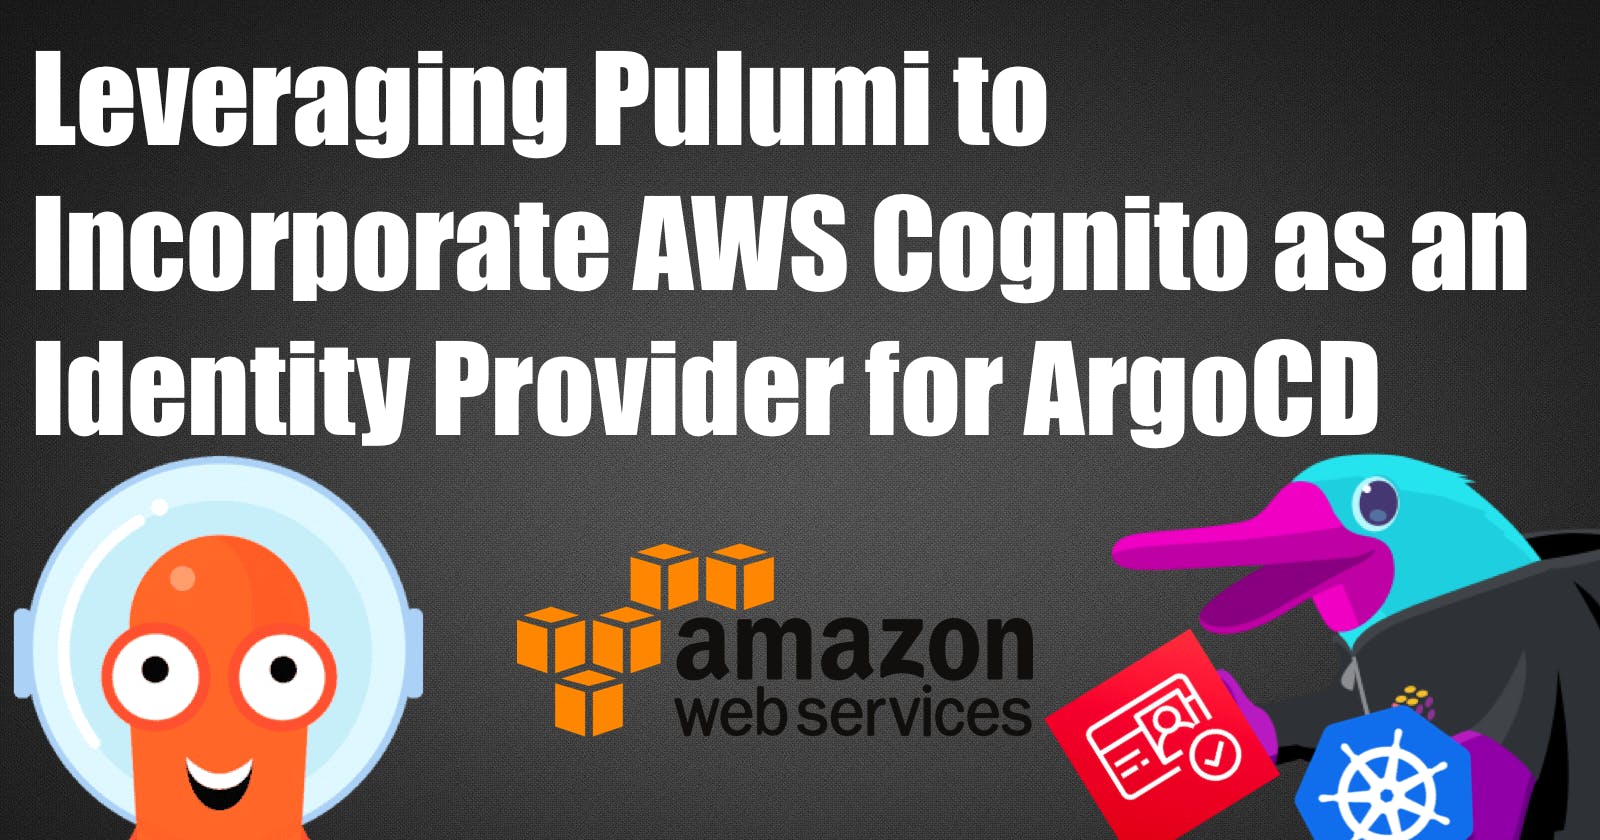 Leveraging Pulumi to Incorporate AWS Cognito as an Identity Provider for ArgoCD